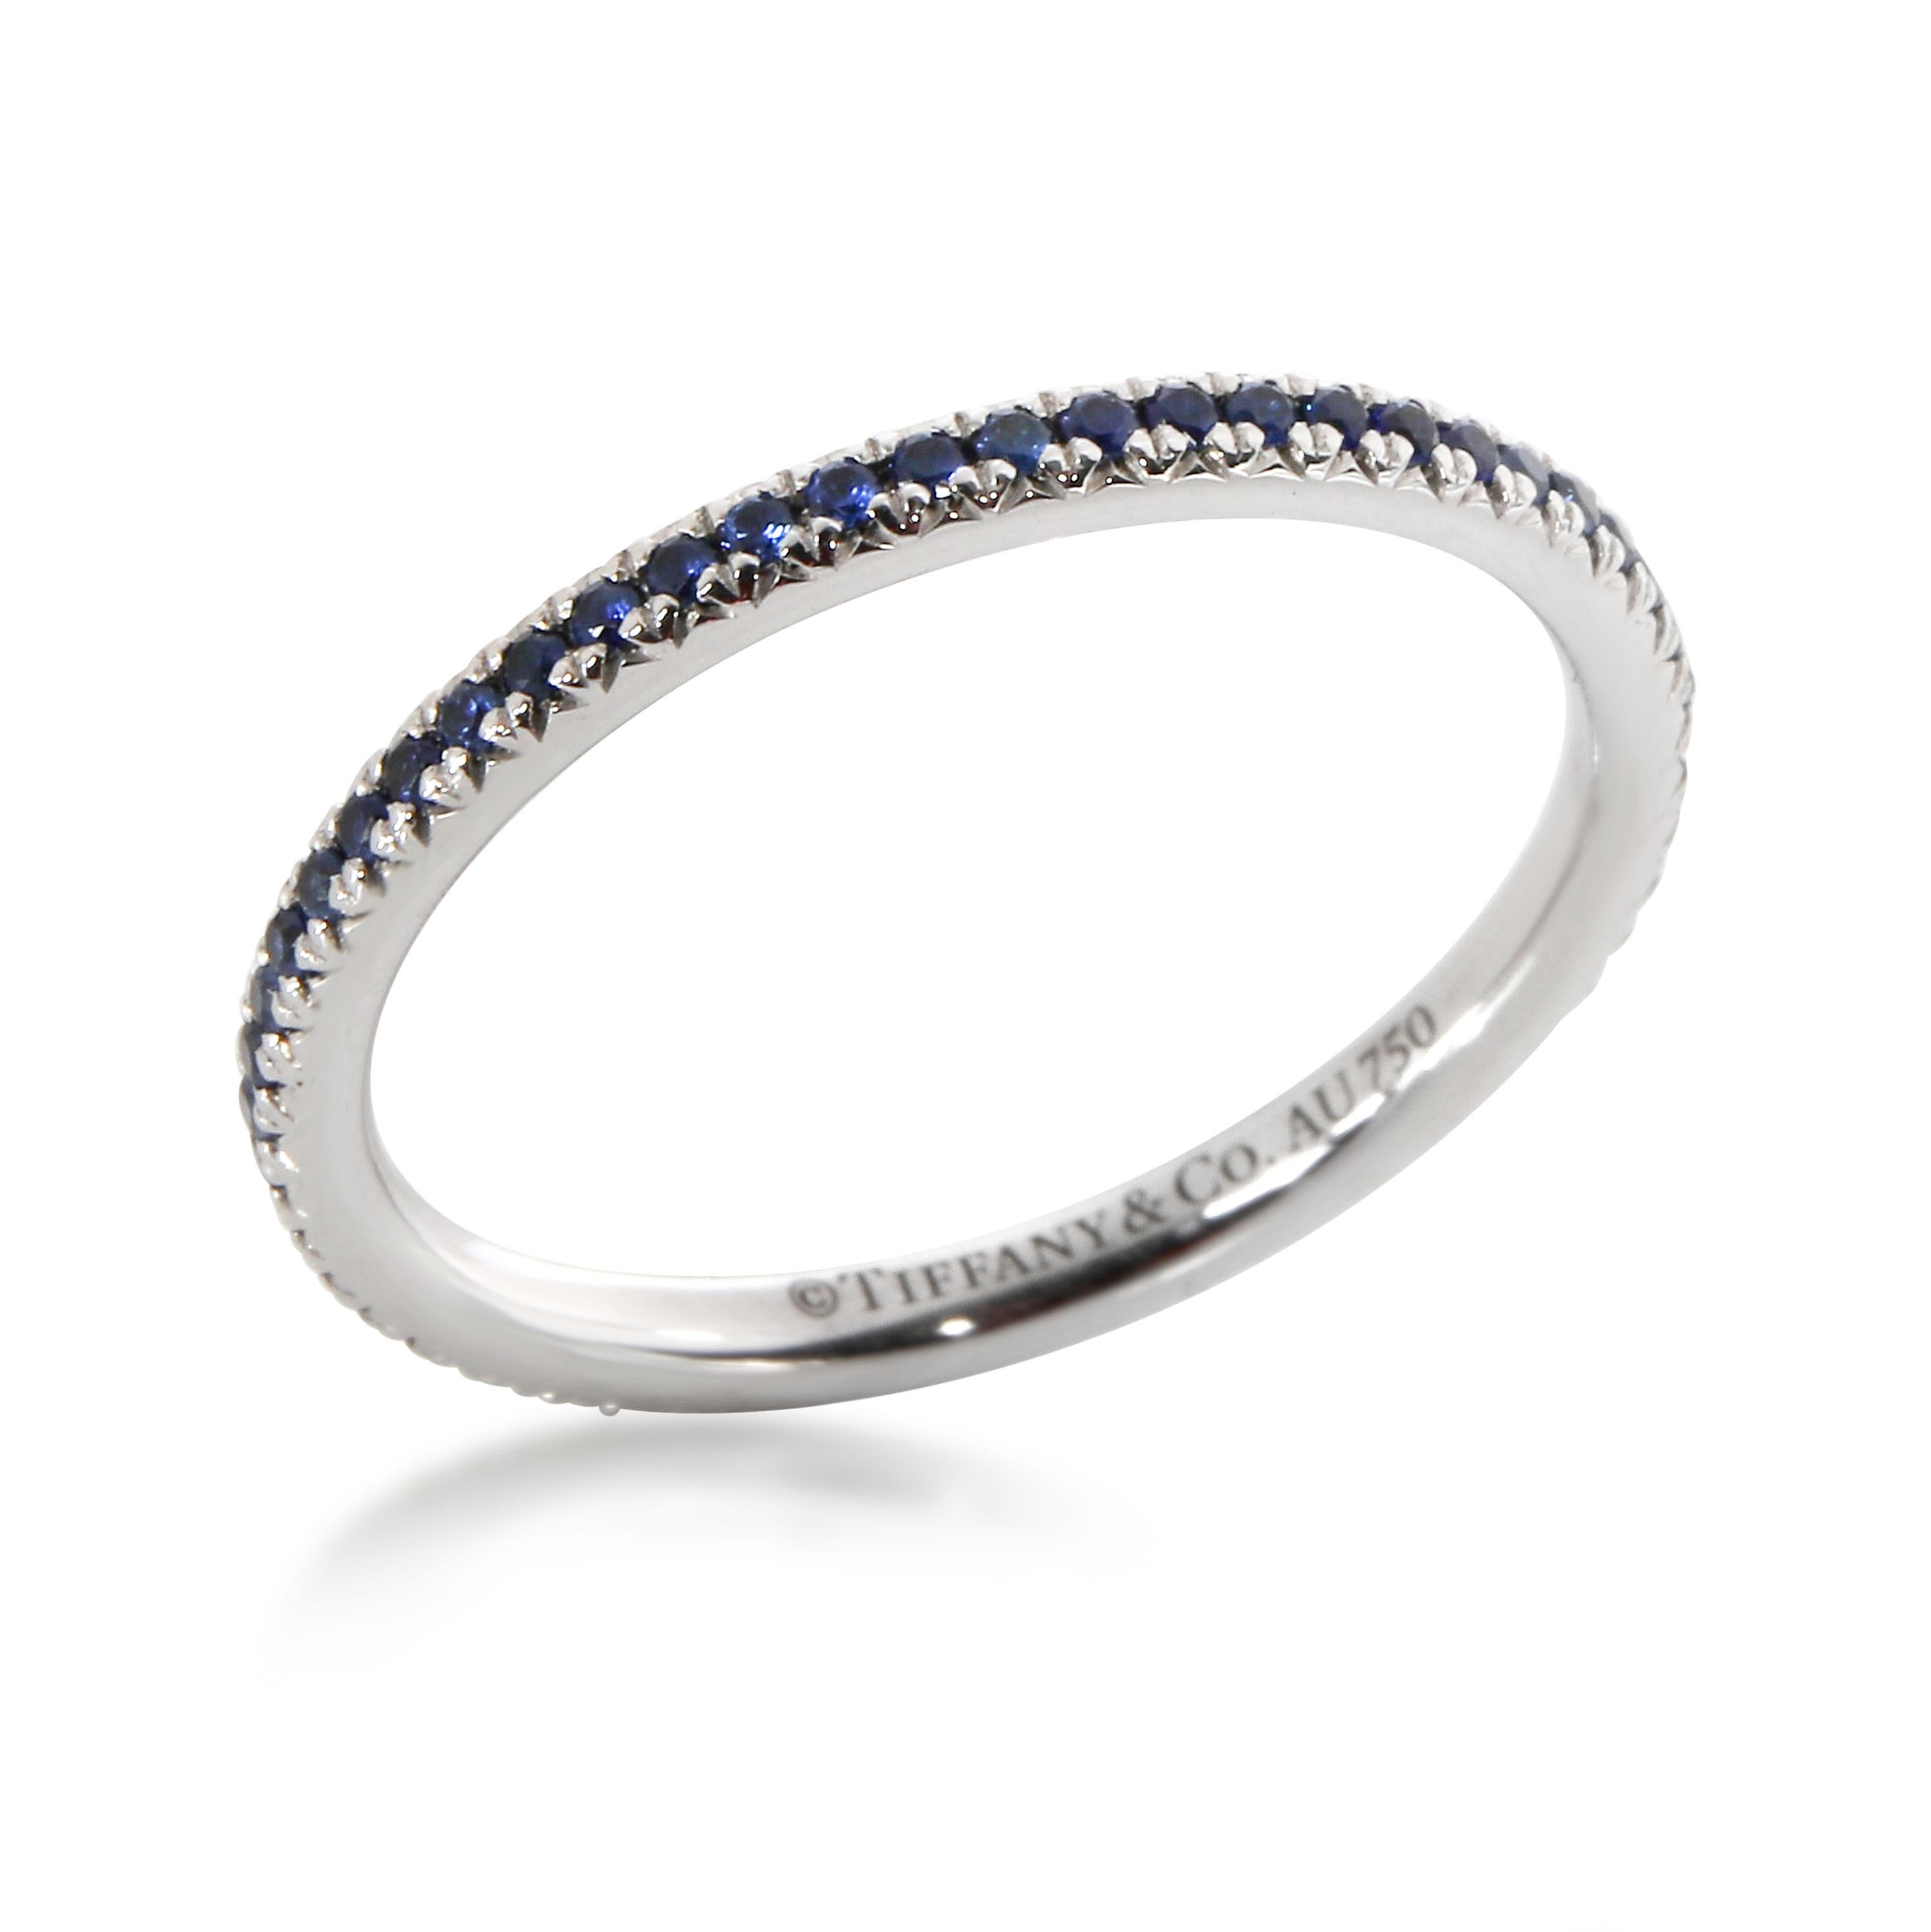 Tiffany & Co. Soleste Blue Sapphire Eternity Band in 18K White Gold

PRIMARY DETAILS
SKU: 108394
Listing Title: Tiffany & Co. Soleste Blue Sapphire Eternity Band in 18K White Gold
Condition Description: Retails for 2,000 USD. In excellent condition